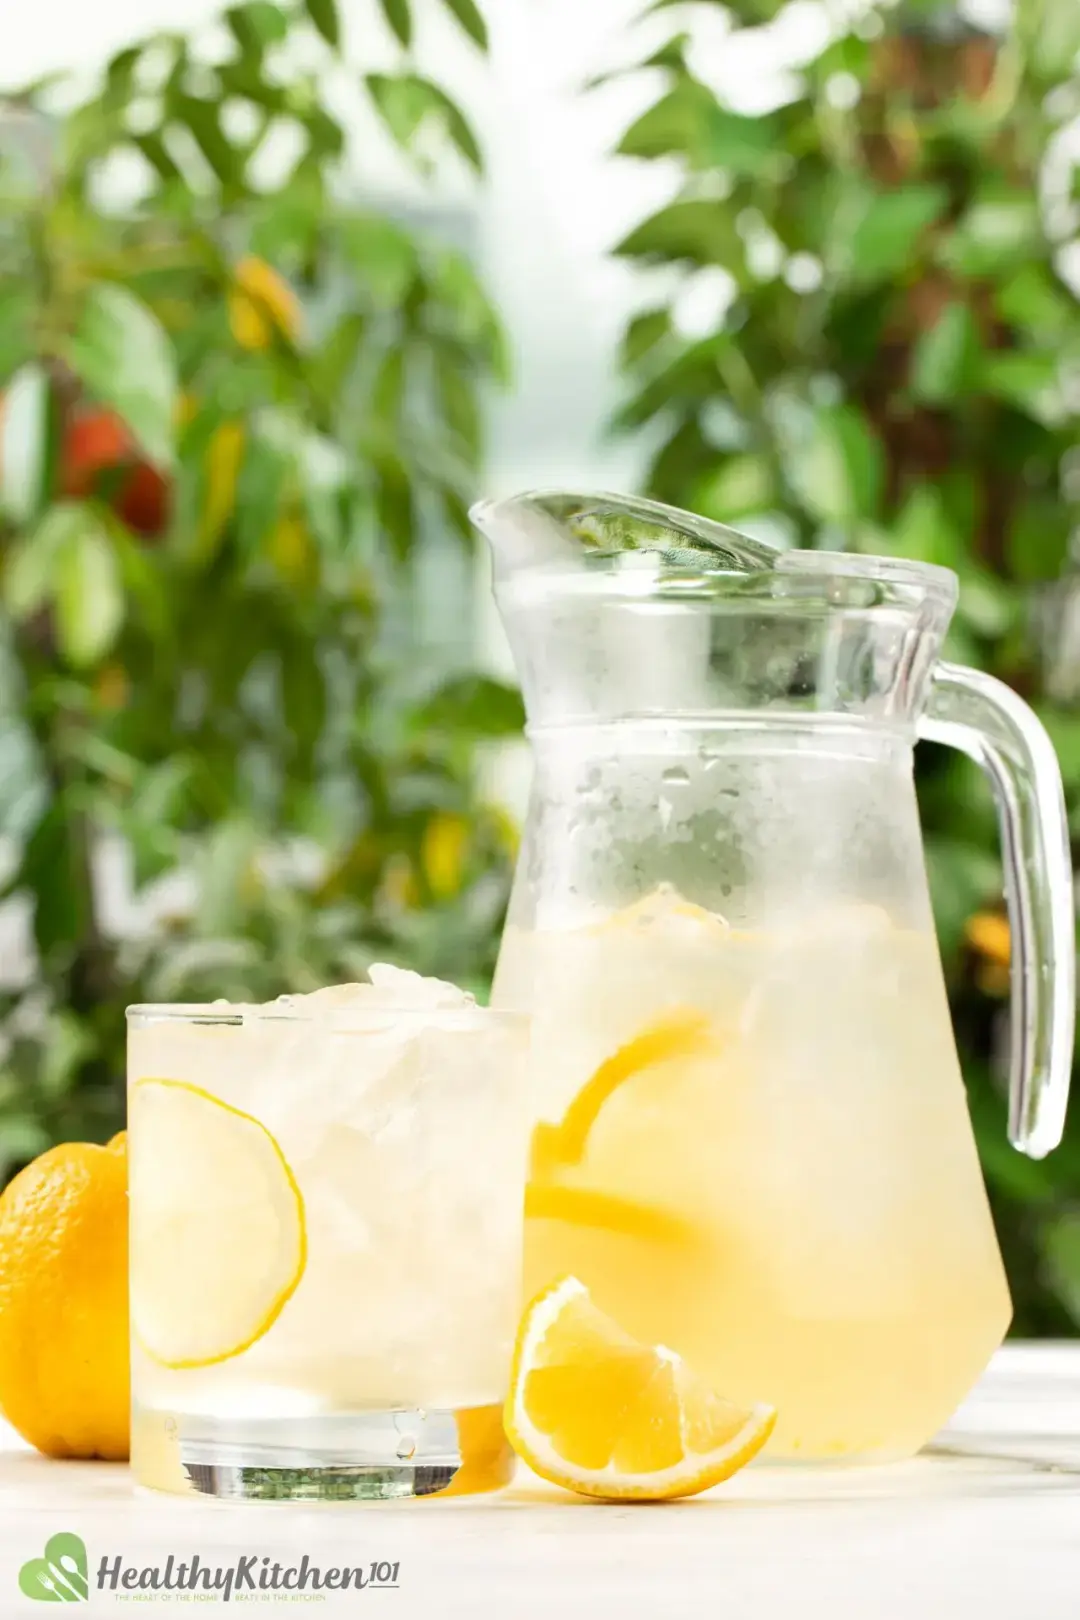  Iced lemonade in a short glass and a pitcher sitting side by side in front of some trees